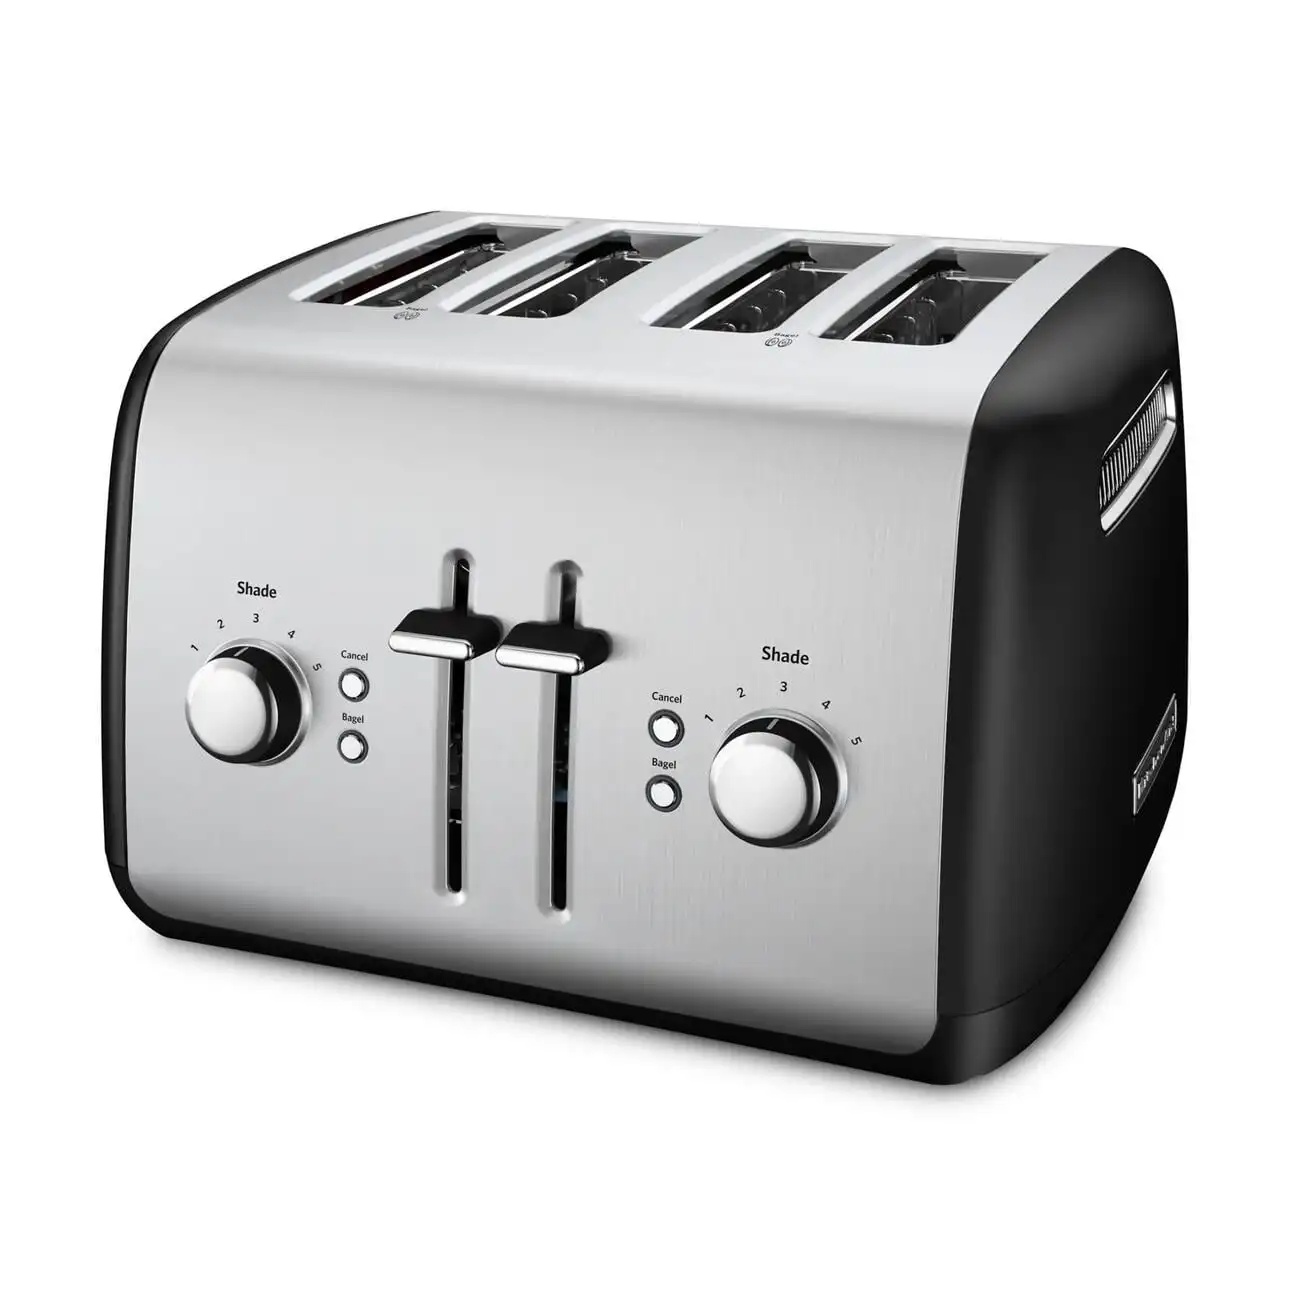 Fast shipping 4-Slice Toaster with Manual High-Lift Lever - KMT4115 kitchen bread grill Toasting Machine home